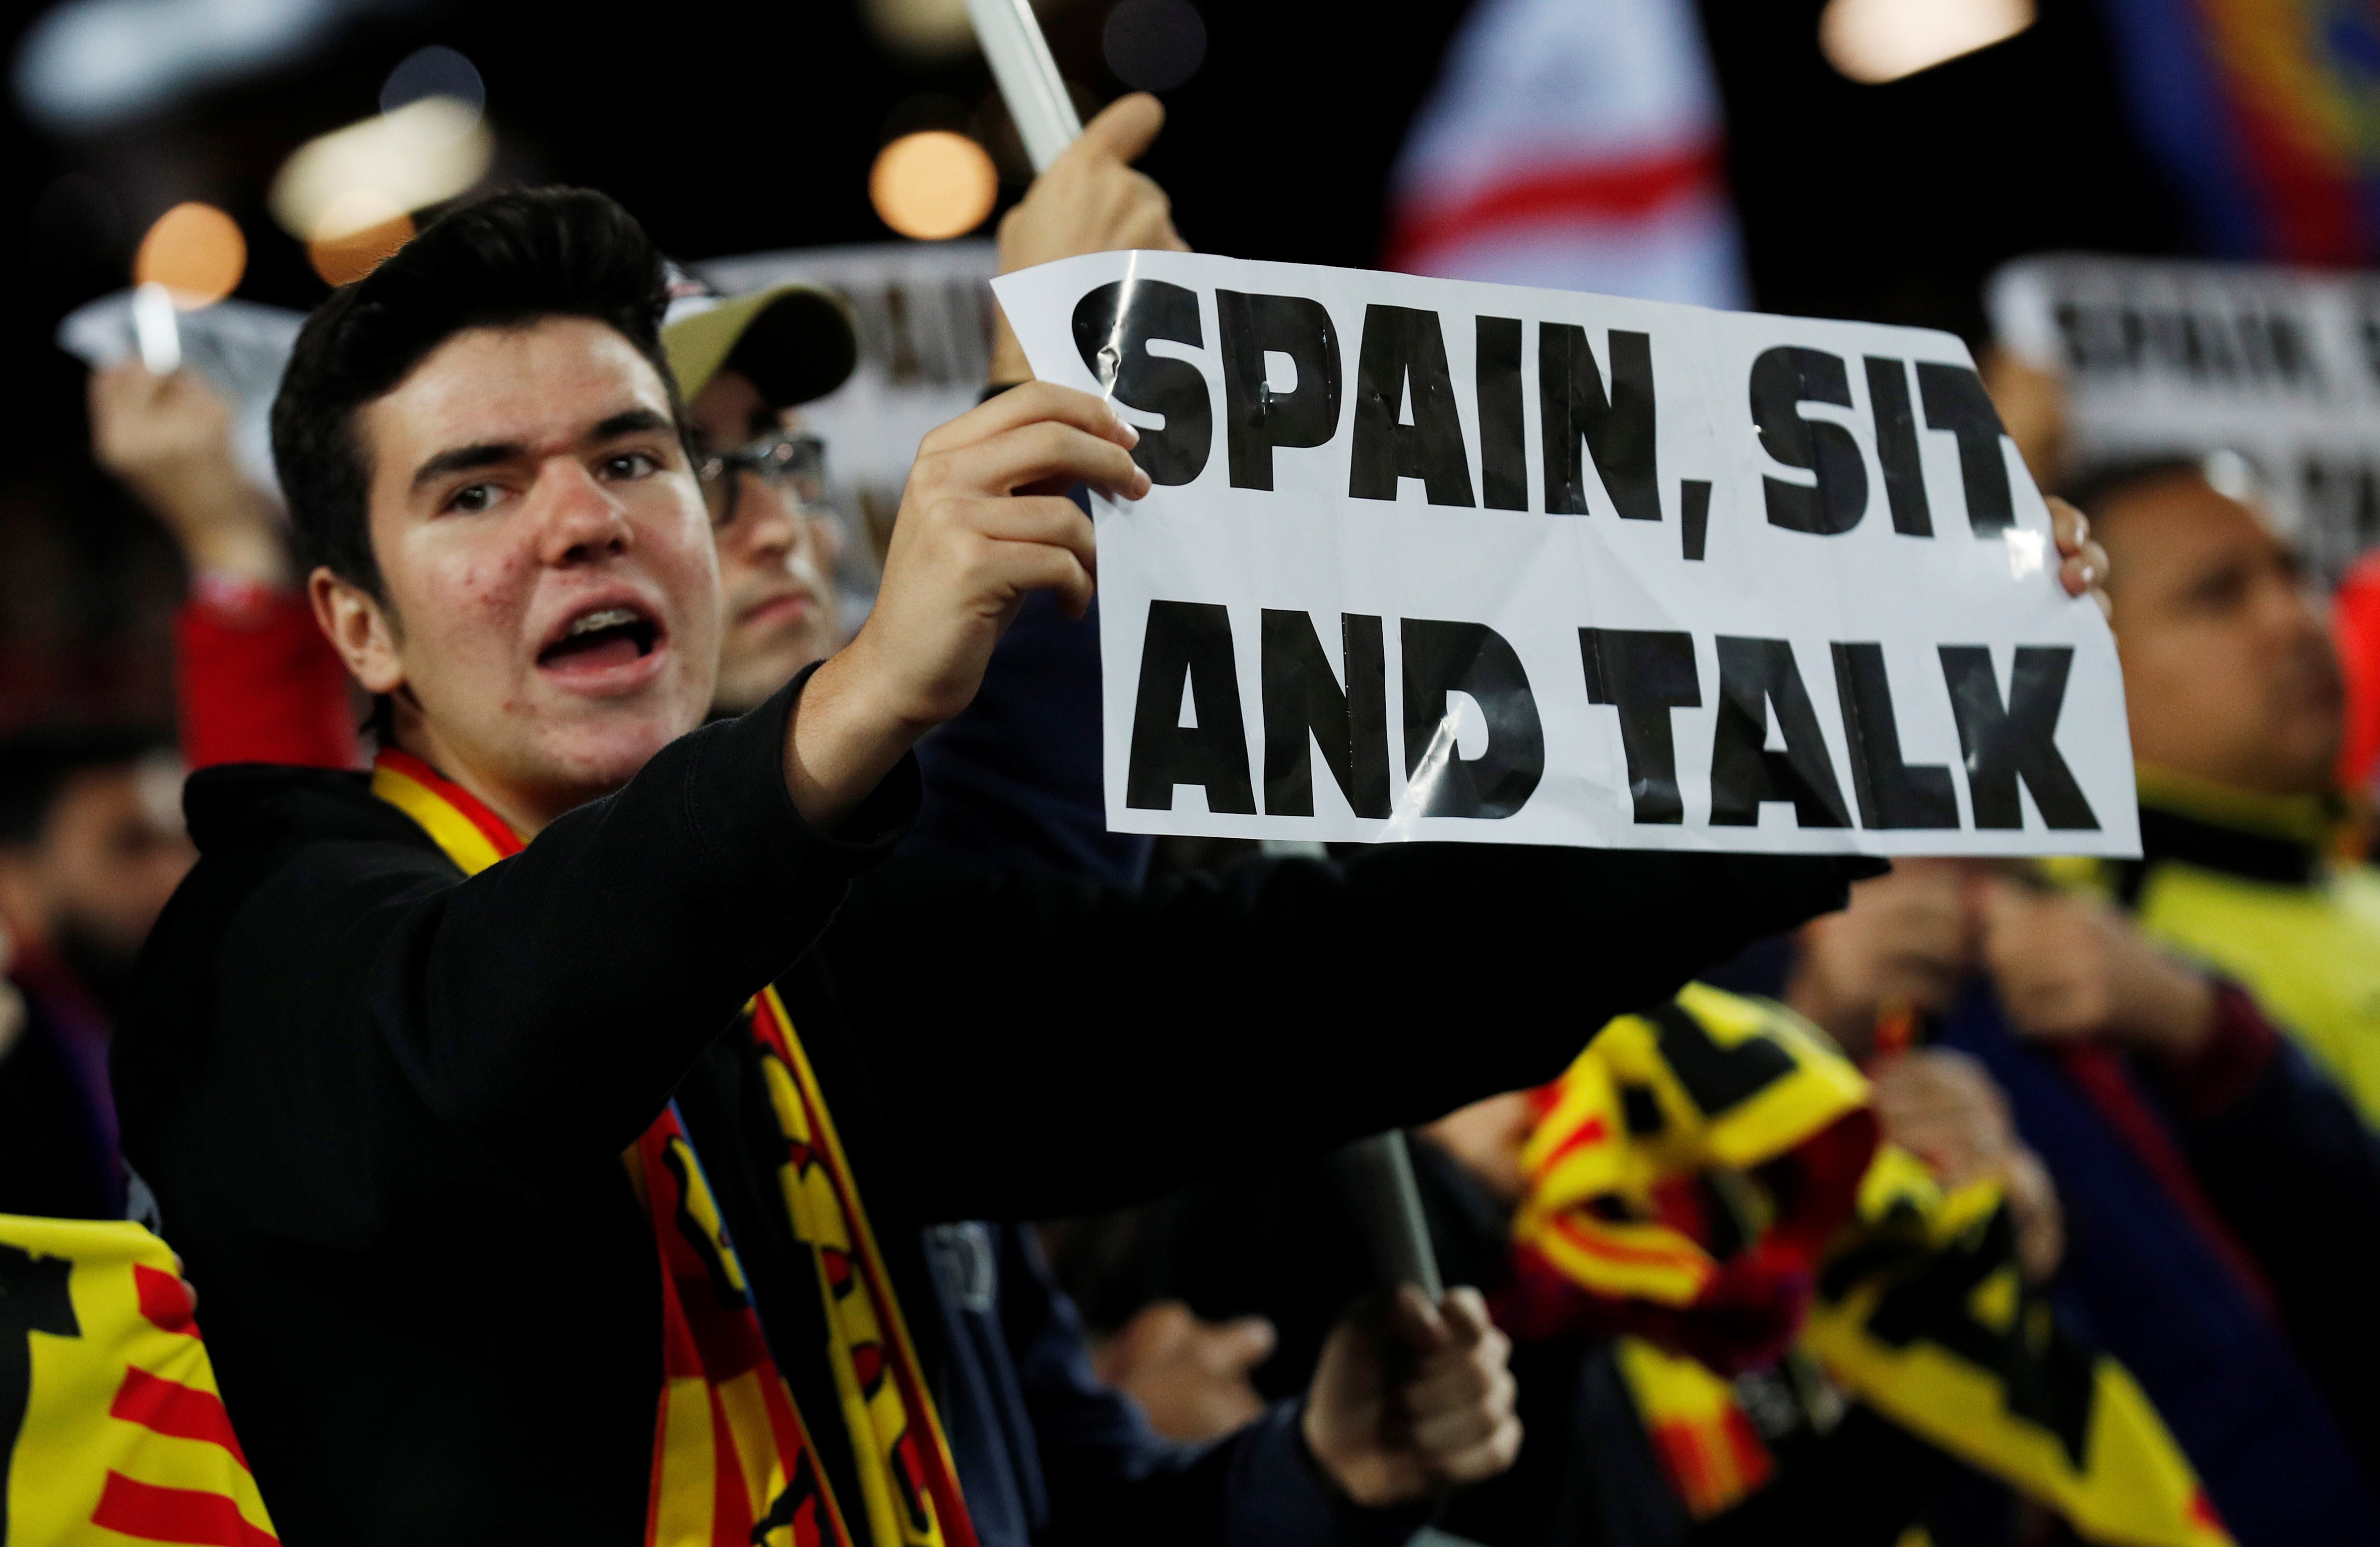 A Barcelona fan holds a sign reading “Spain, Sit And Talk” at the Champions League clash between FC Barcelona and Slavia Prague (by REUTERS/Albert Gea)